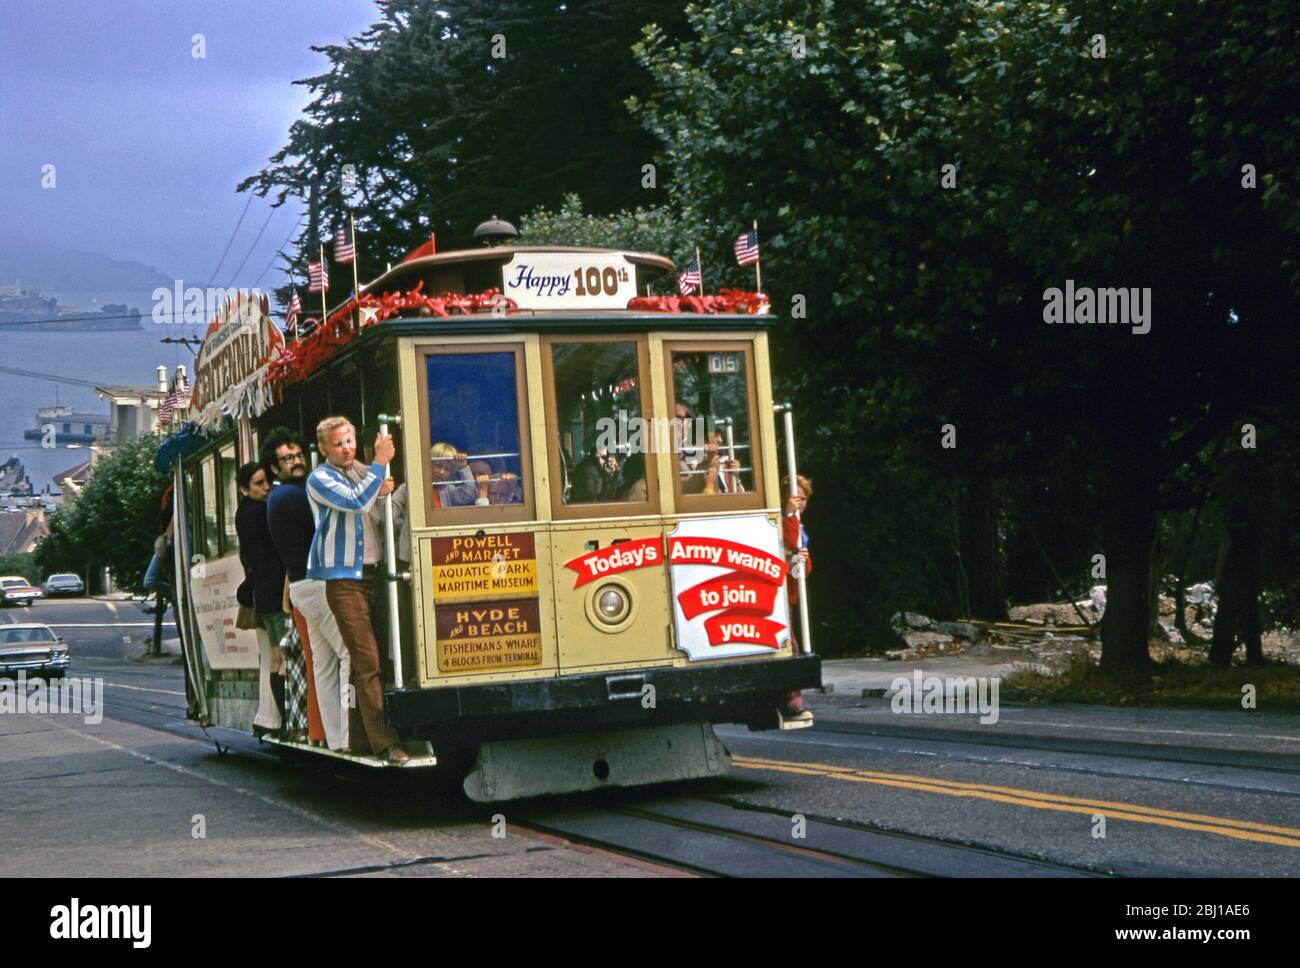 Passengers on board an ascending cable car, Powell-Hyde Line, San Francisco, California, USA 1973. That year marked the centennial of the famous public transport system and the cable cars were decorated with signs, bunting and American flags. Stock Photo